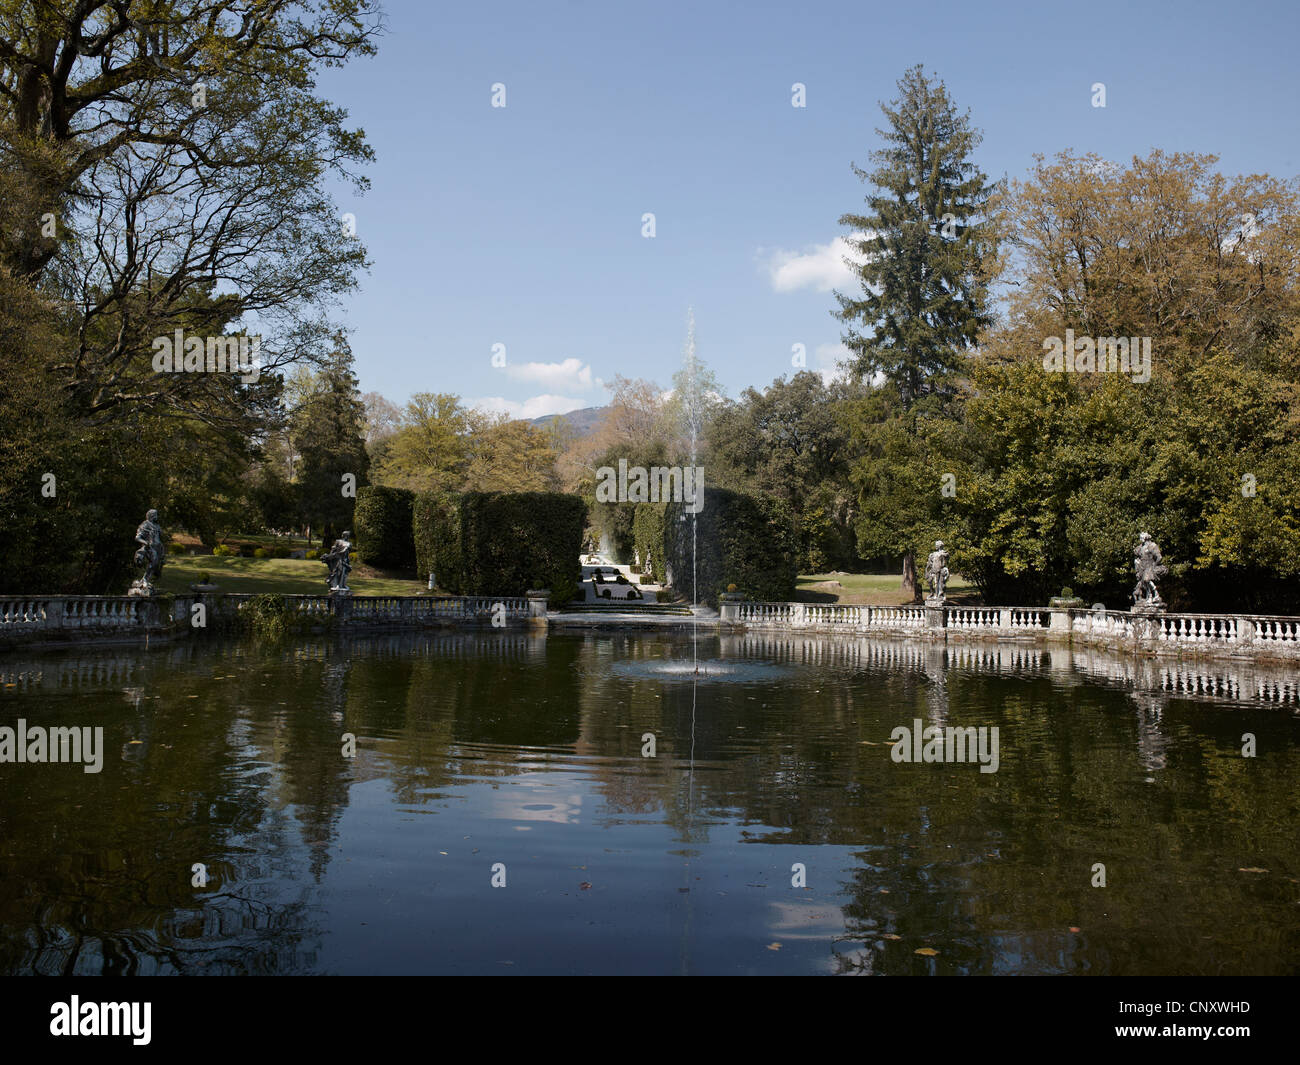 Villa Mansi, near Lucca, Italy. Formal water gardens with fishpond, fountain and balustrade with statues Stock Photo